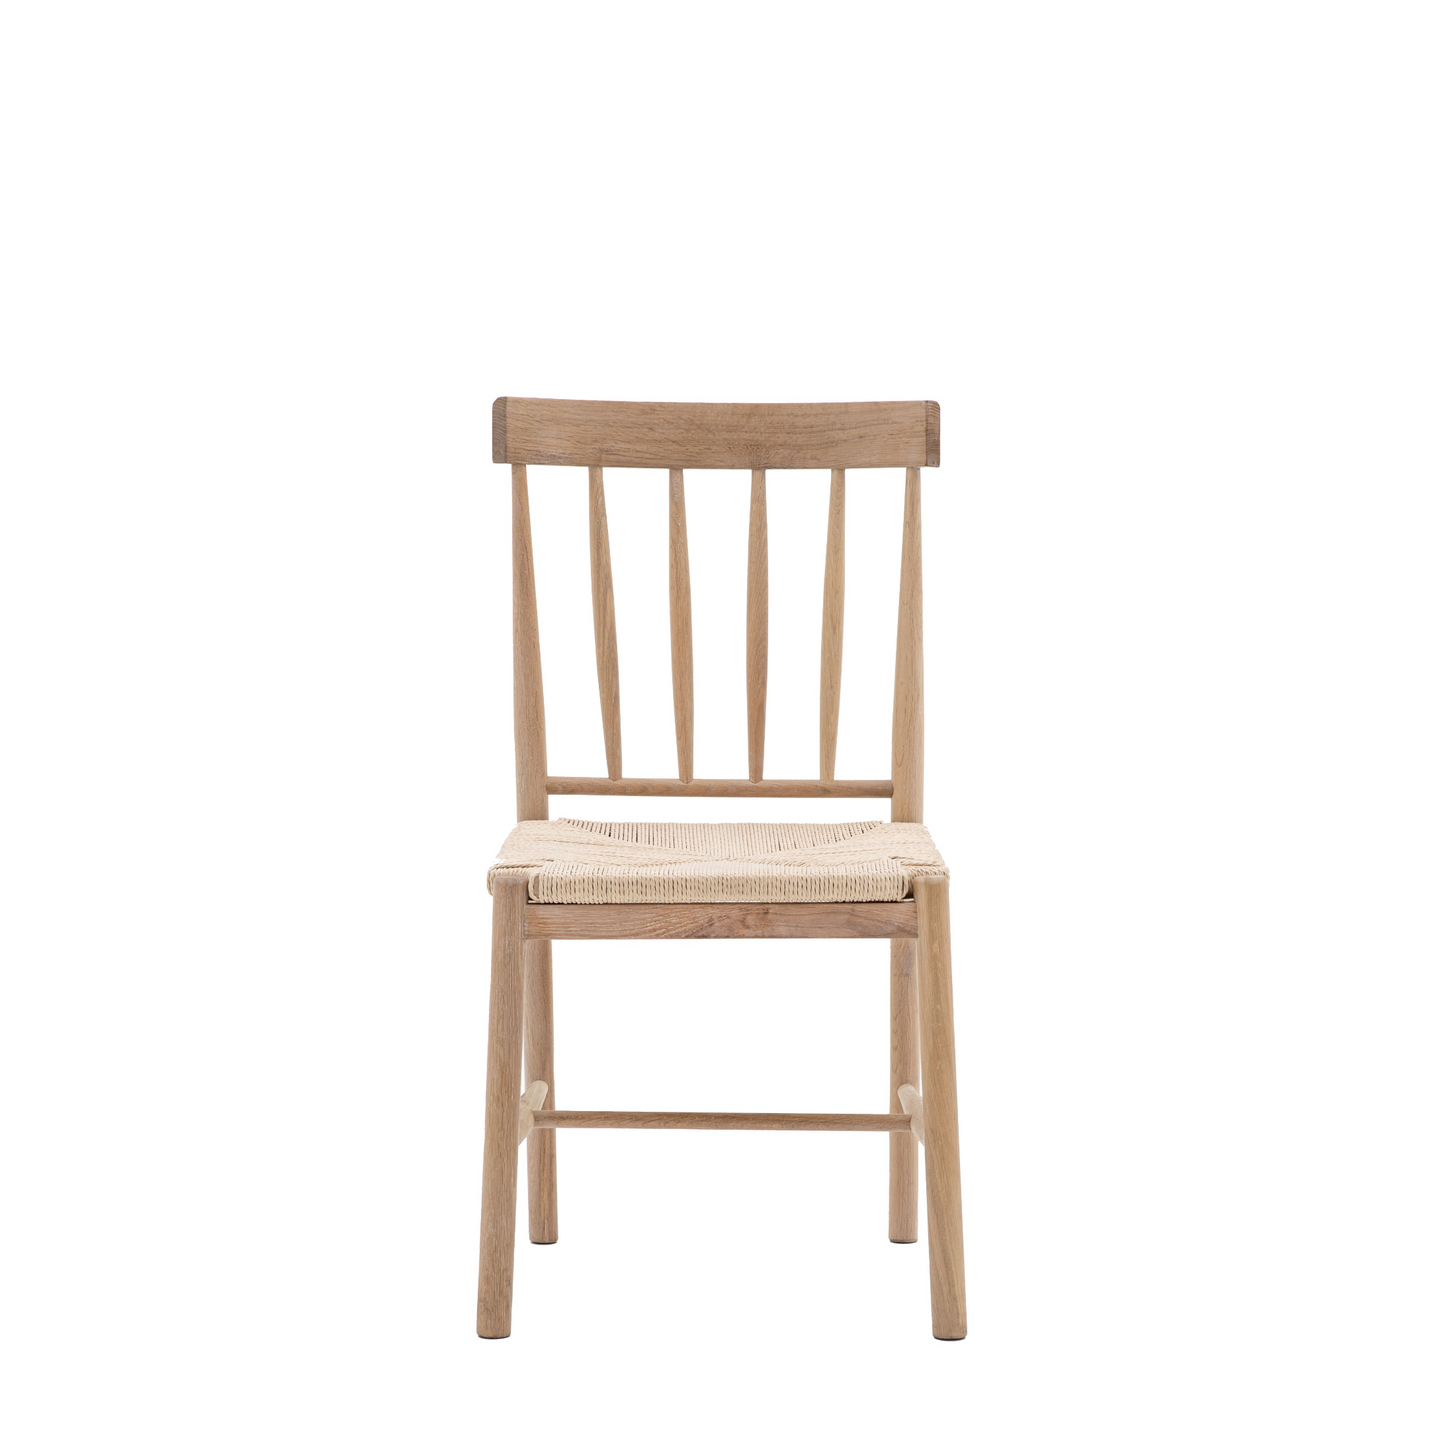 A Buckland Dining Chair 2pk Oak by Kikiathome.co.uk, perfect for home furniture and interior decor, showcased on a white background.